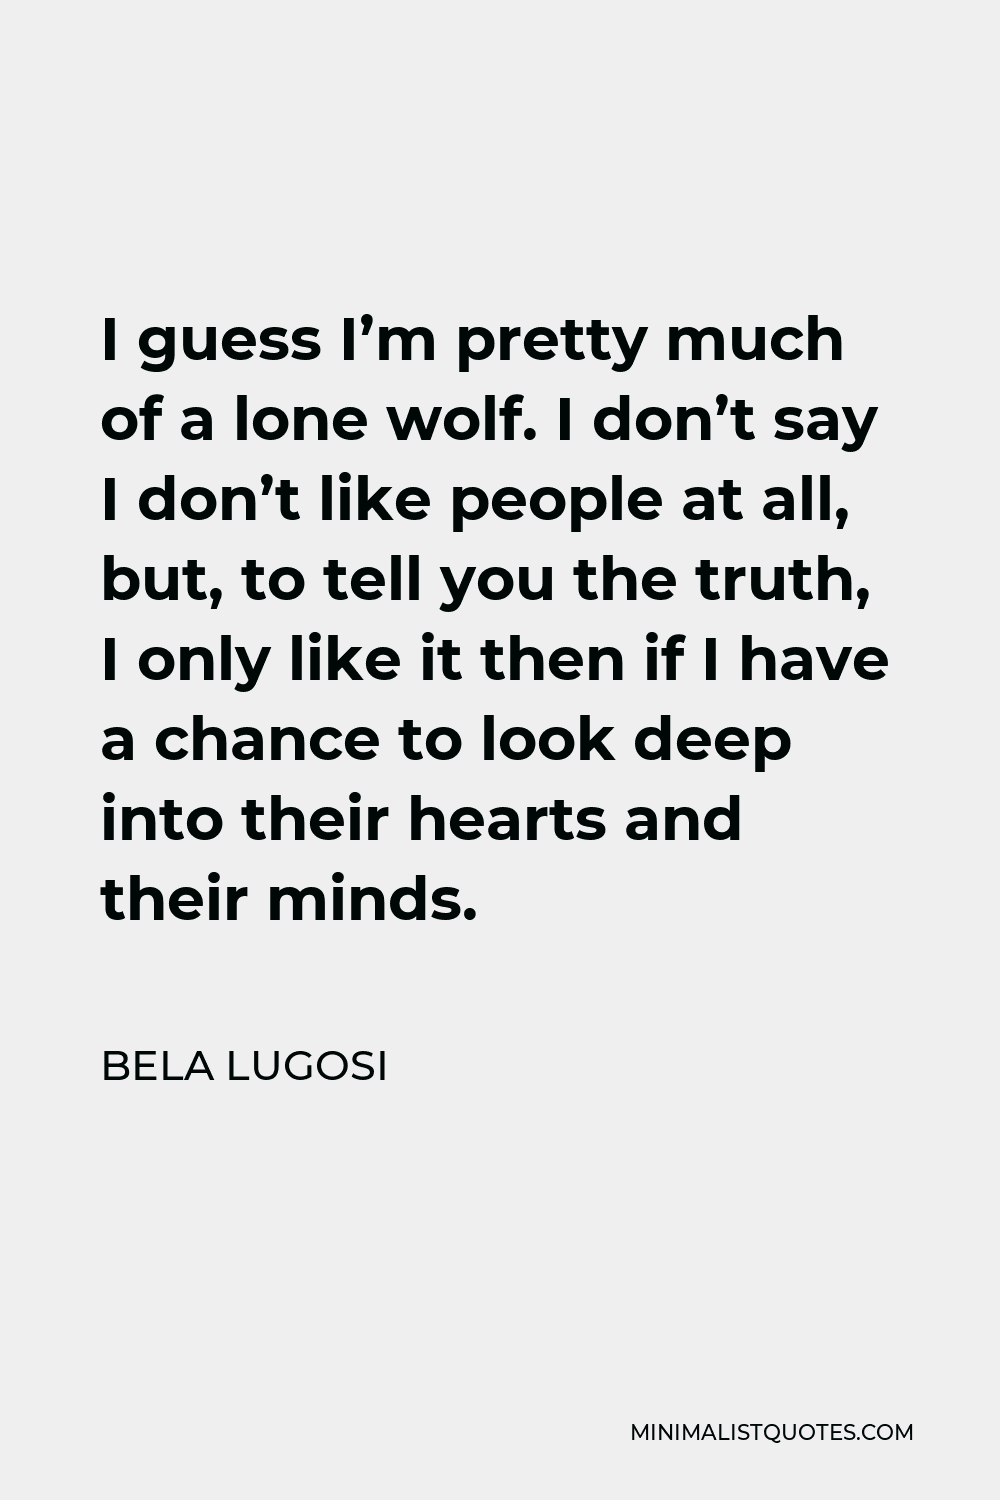 Bela Lugosi Quote - I guess I’m pretty much of a lone wolf. I don’t say I don’t like people at all, but, to tell you the truth, I only like it then if I have a chance to look deep into their hearts and their minds.